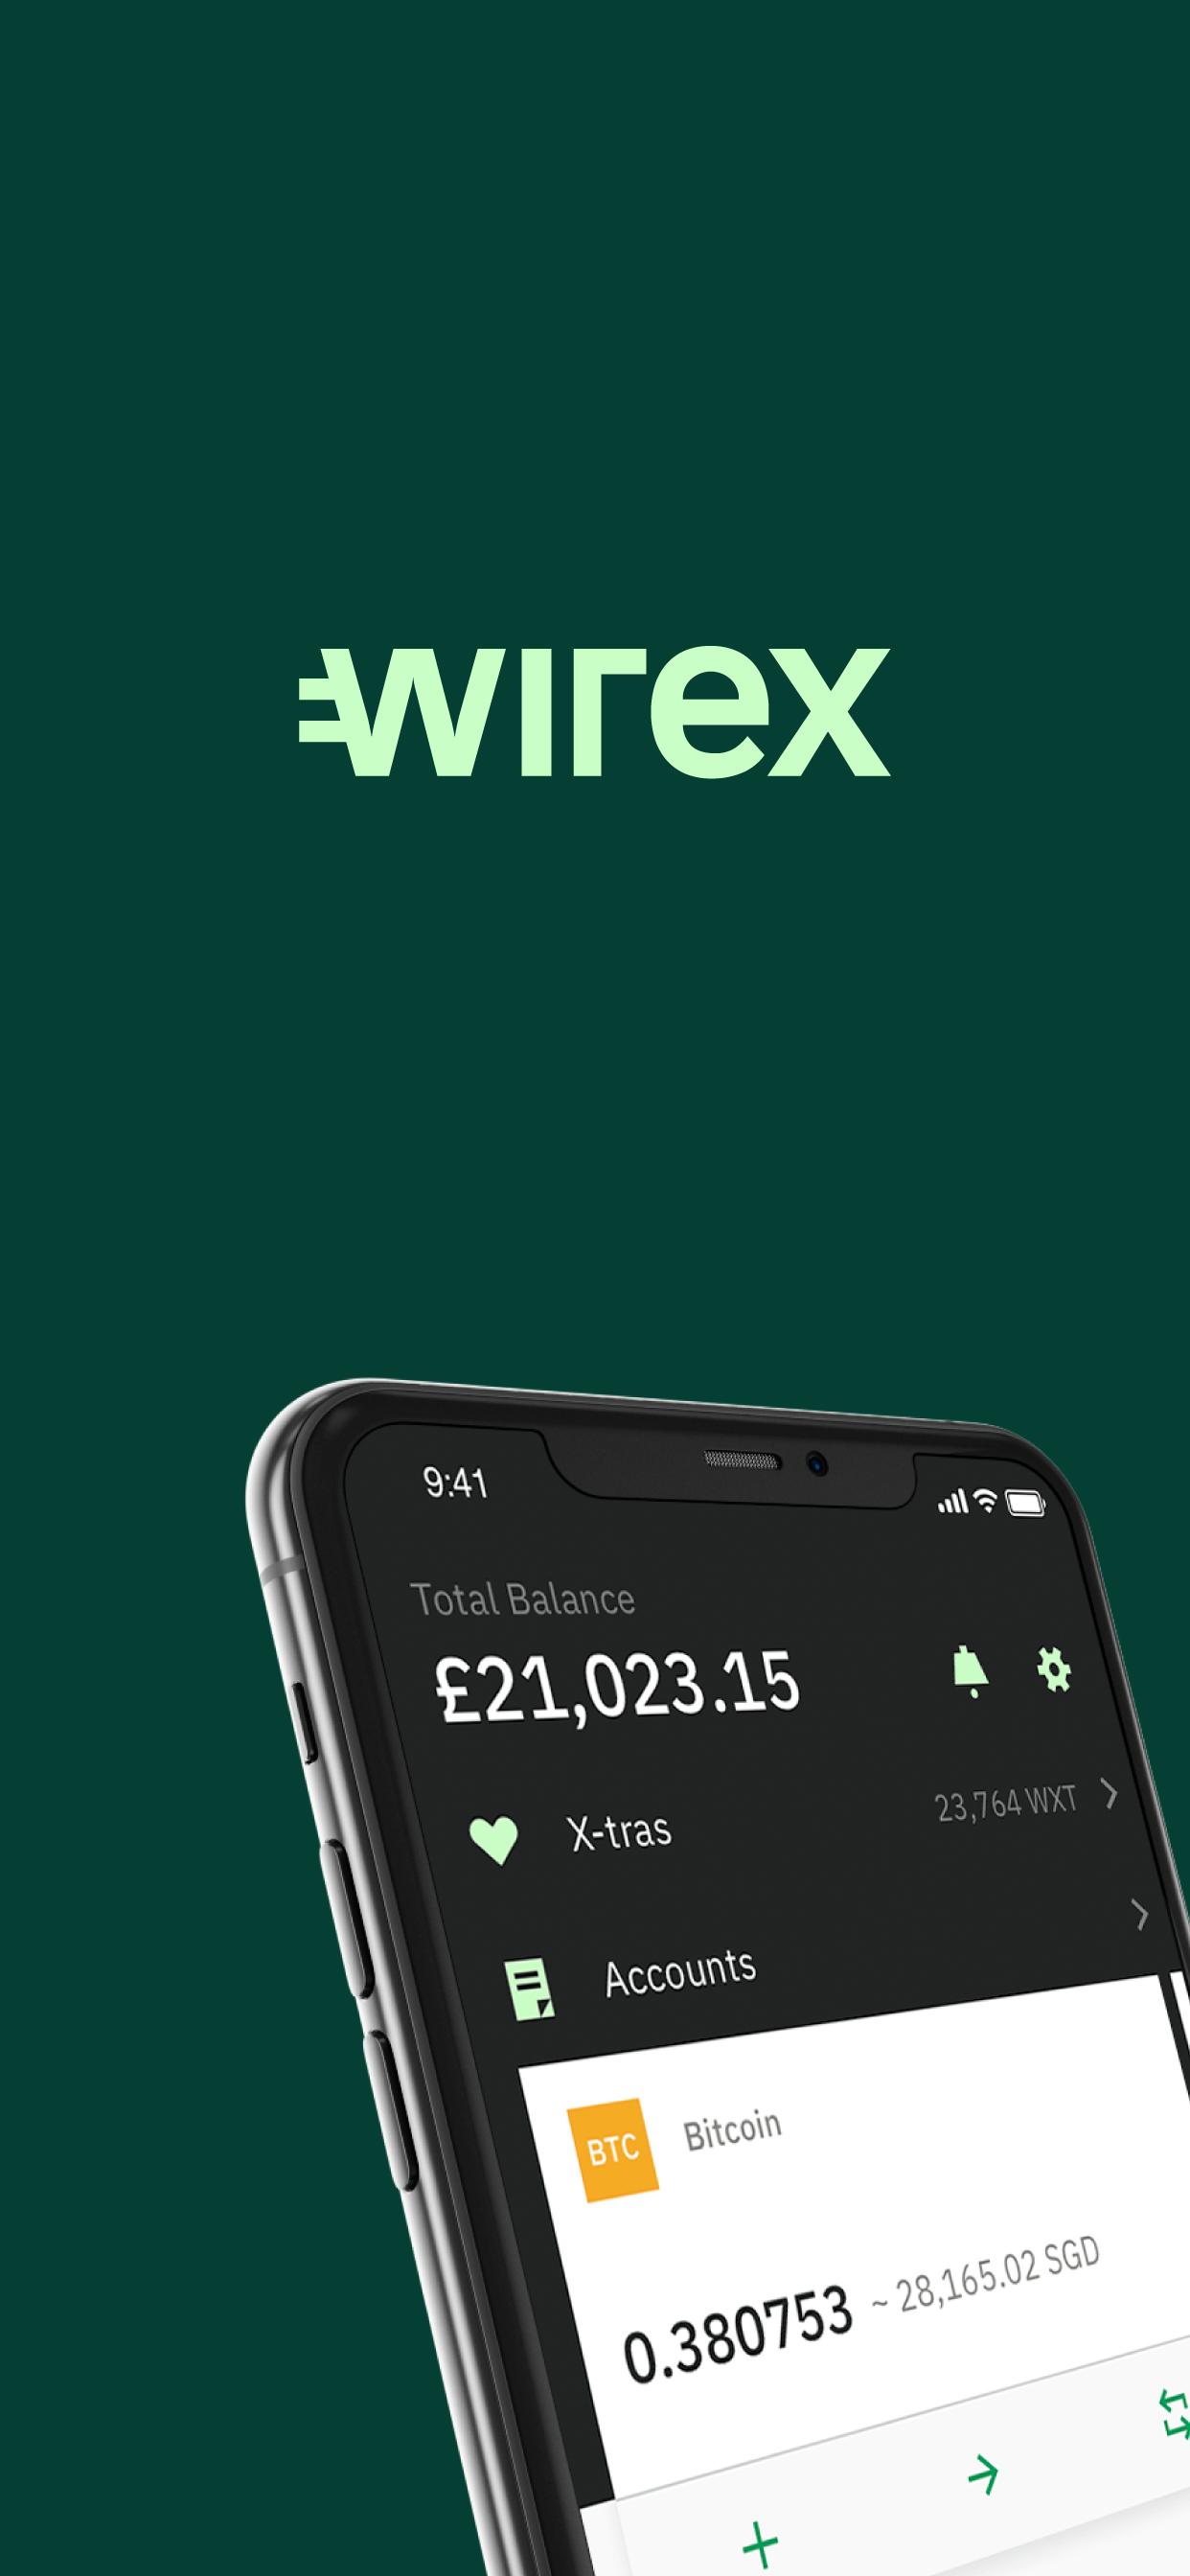 Live chat wirex Wirex Contact